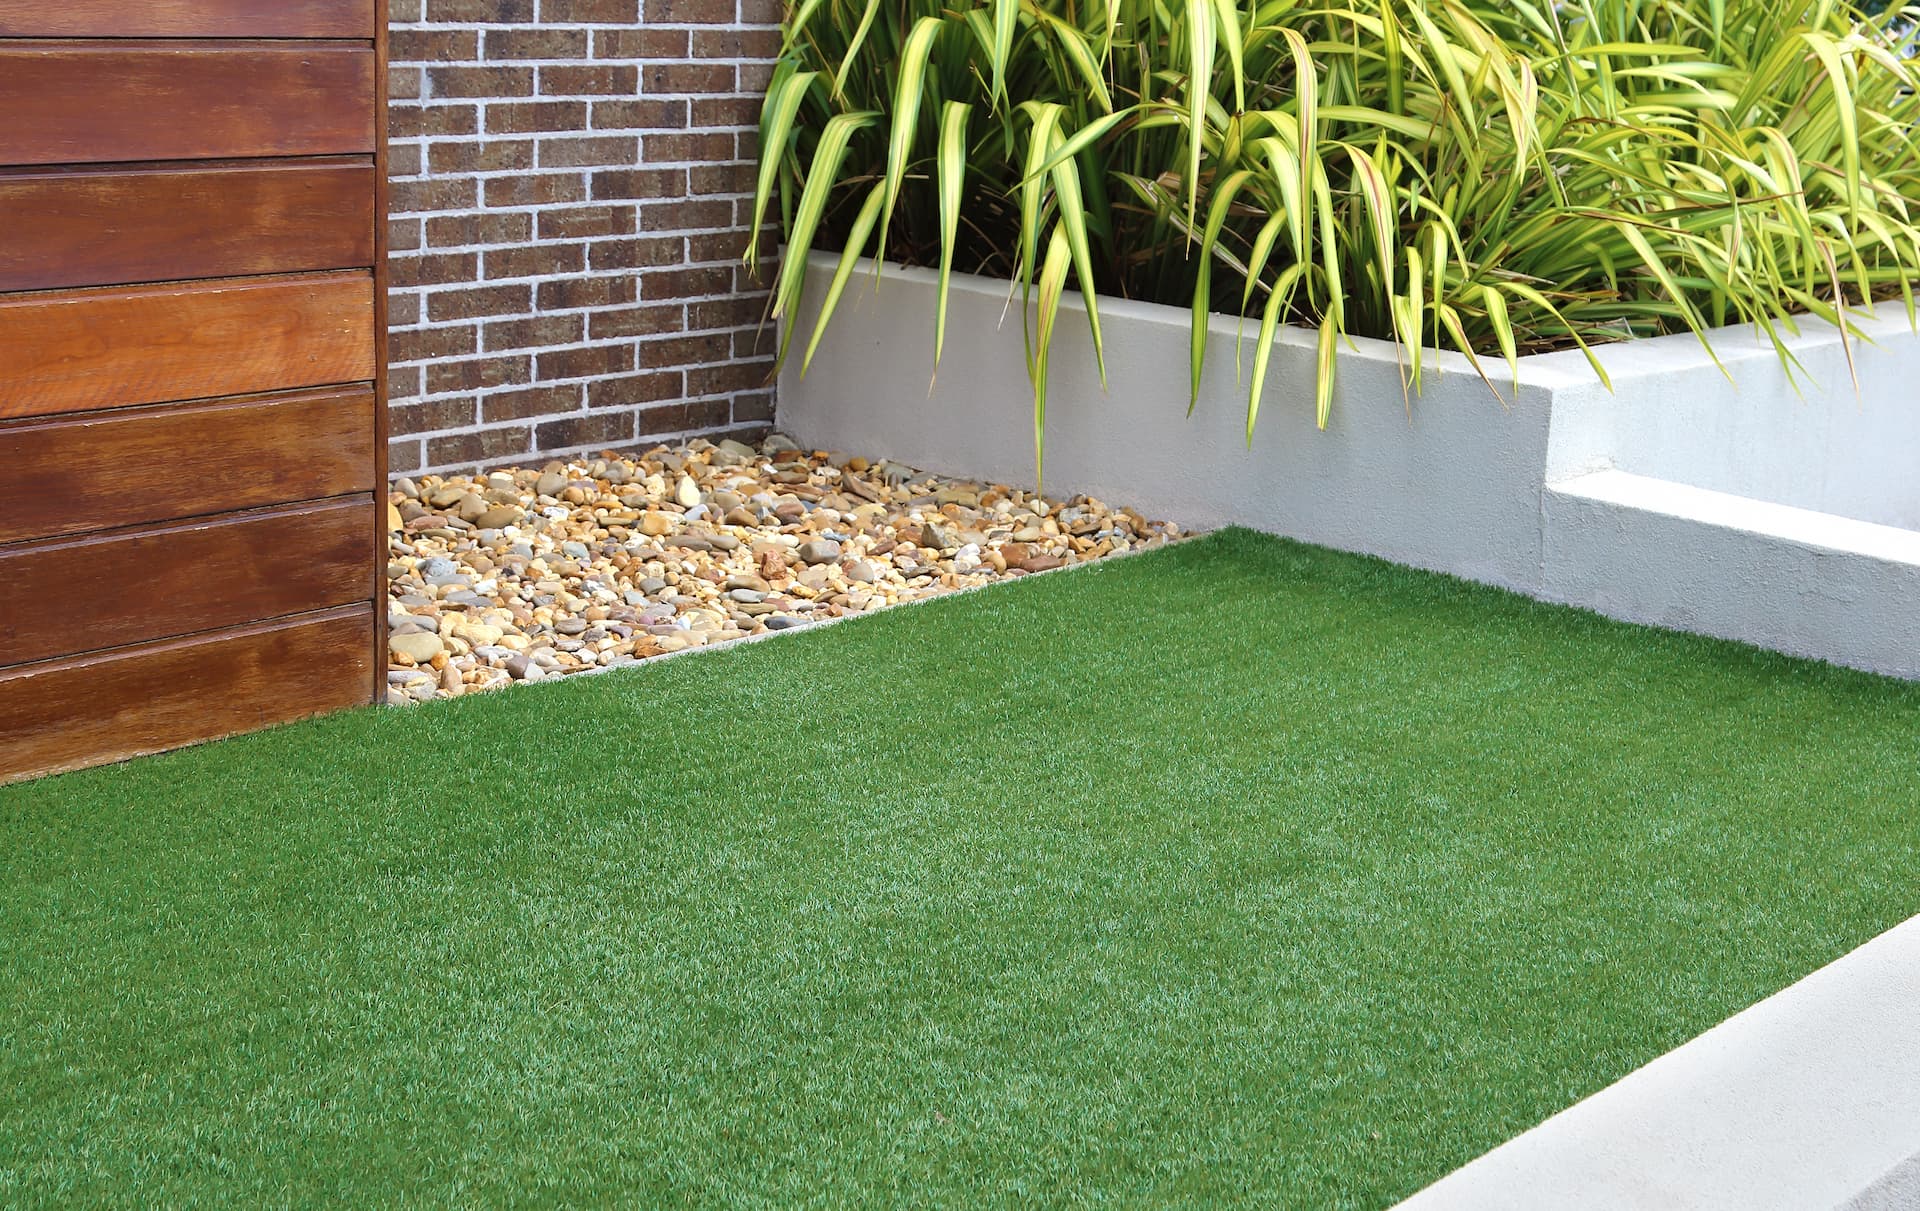 Licenced Artificial Grass & Turf services in Rochdale